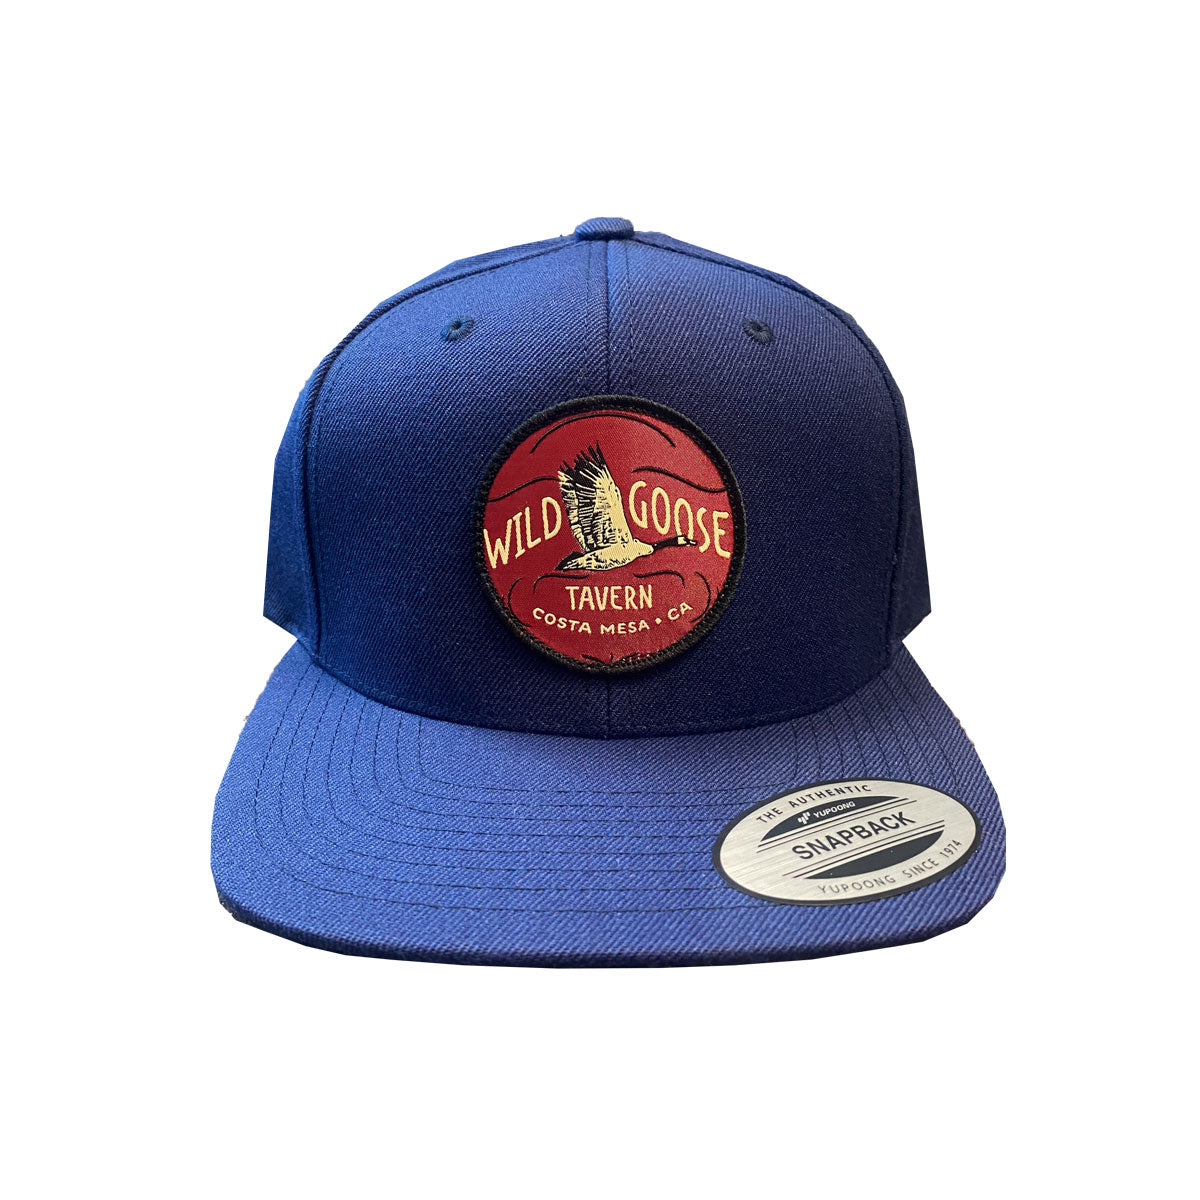 Navy Blue Snapback Hat with Red Wild Goose Patch